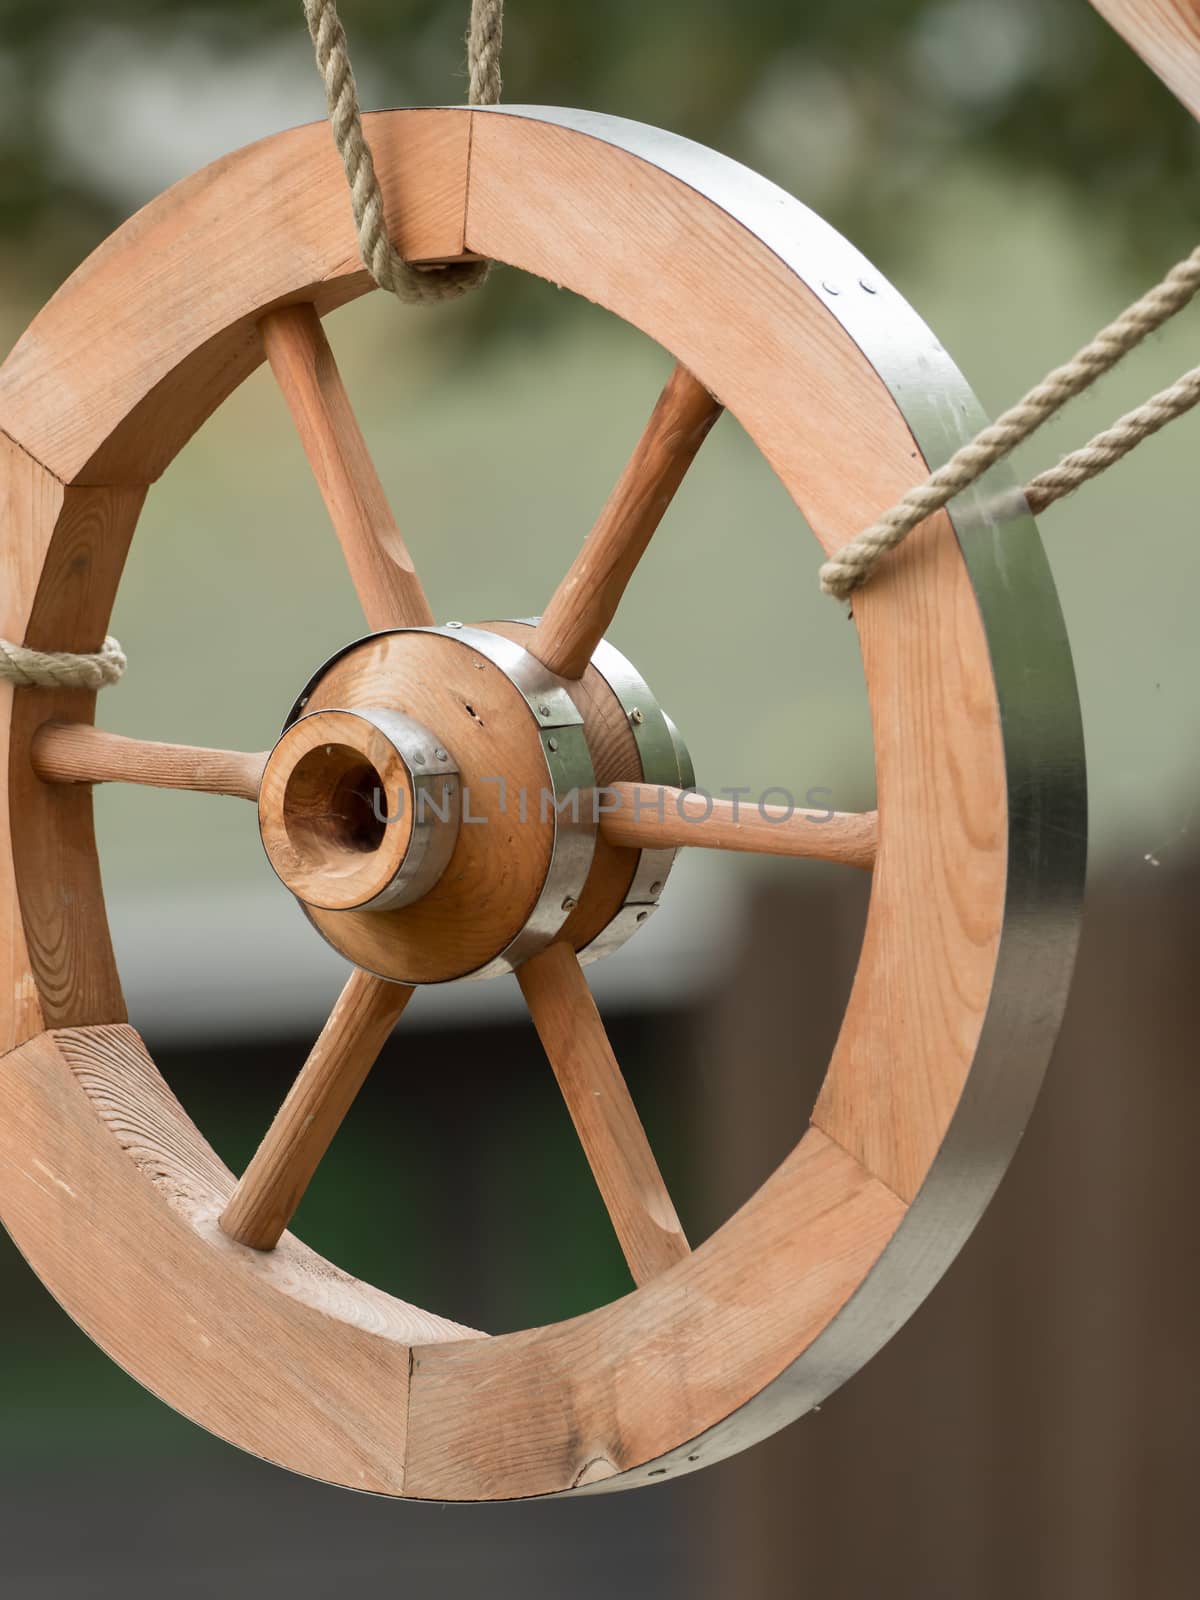 A wooden wheel hangs out as a decoration